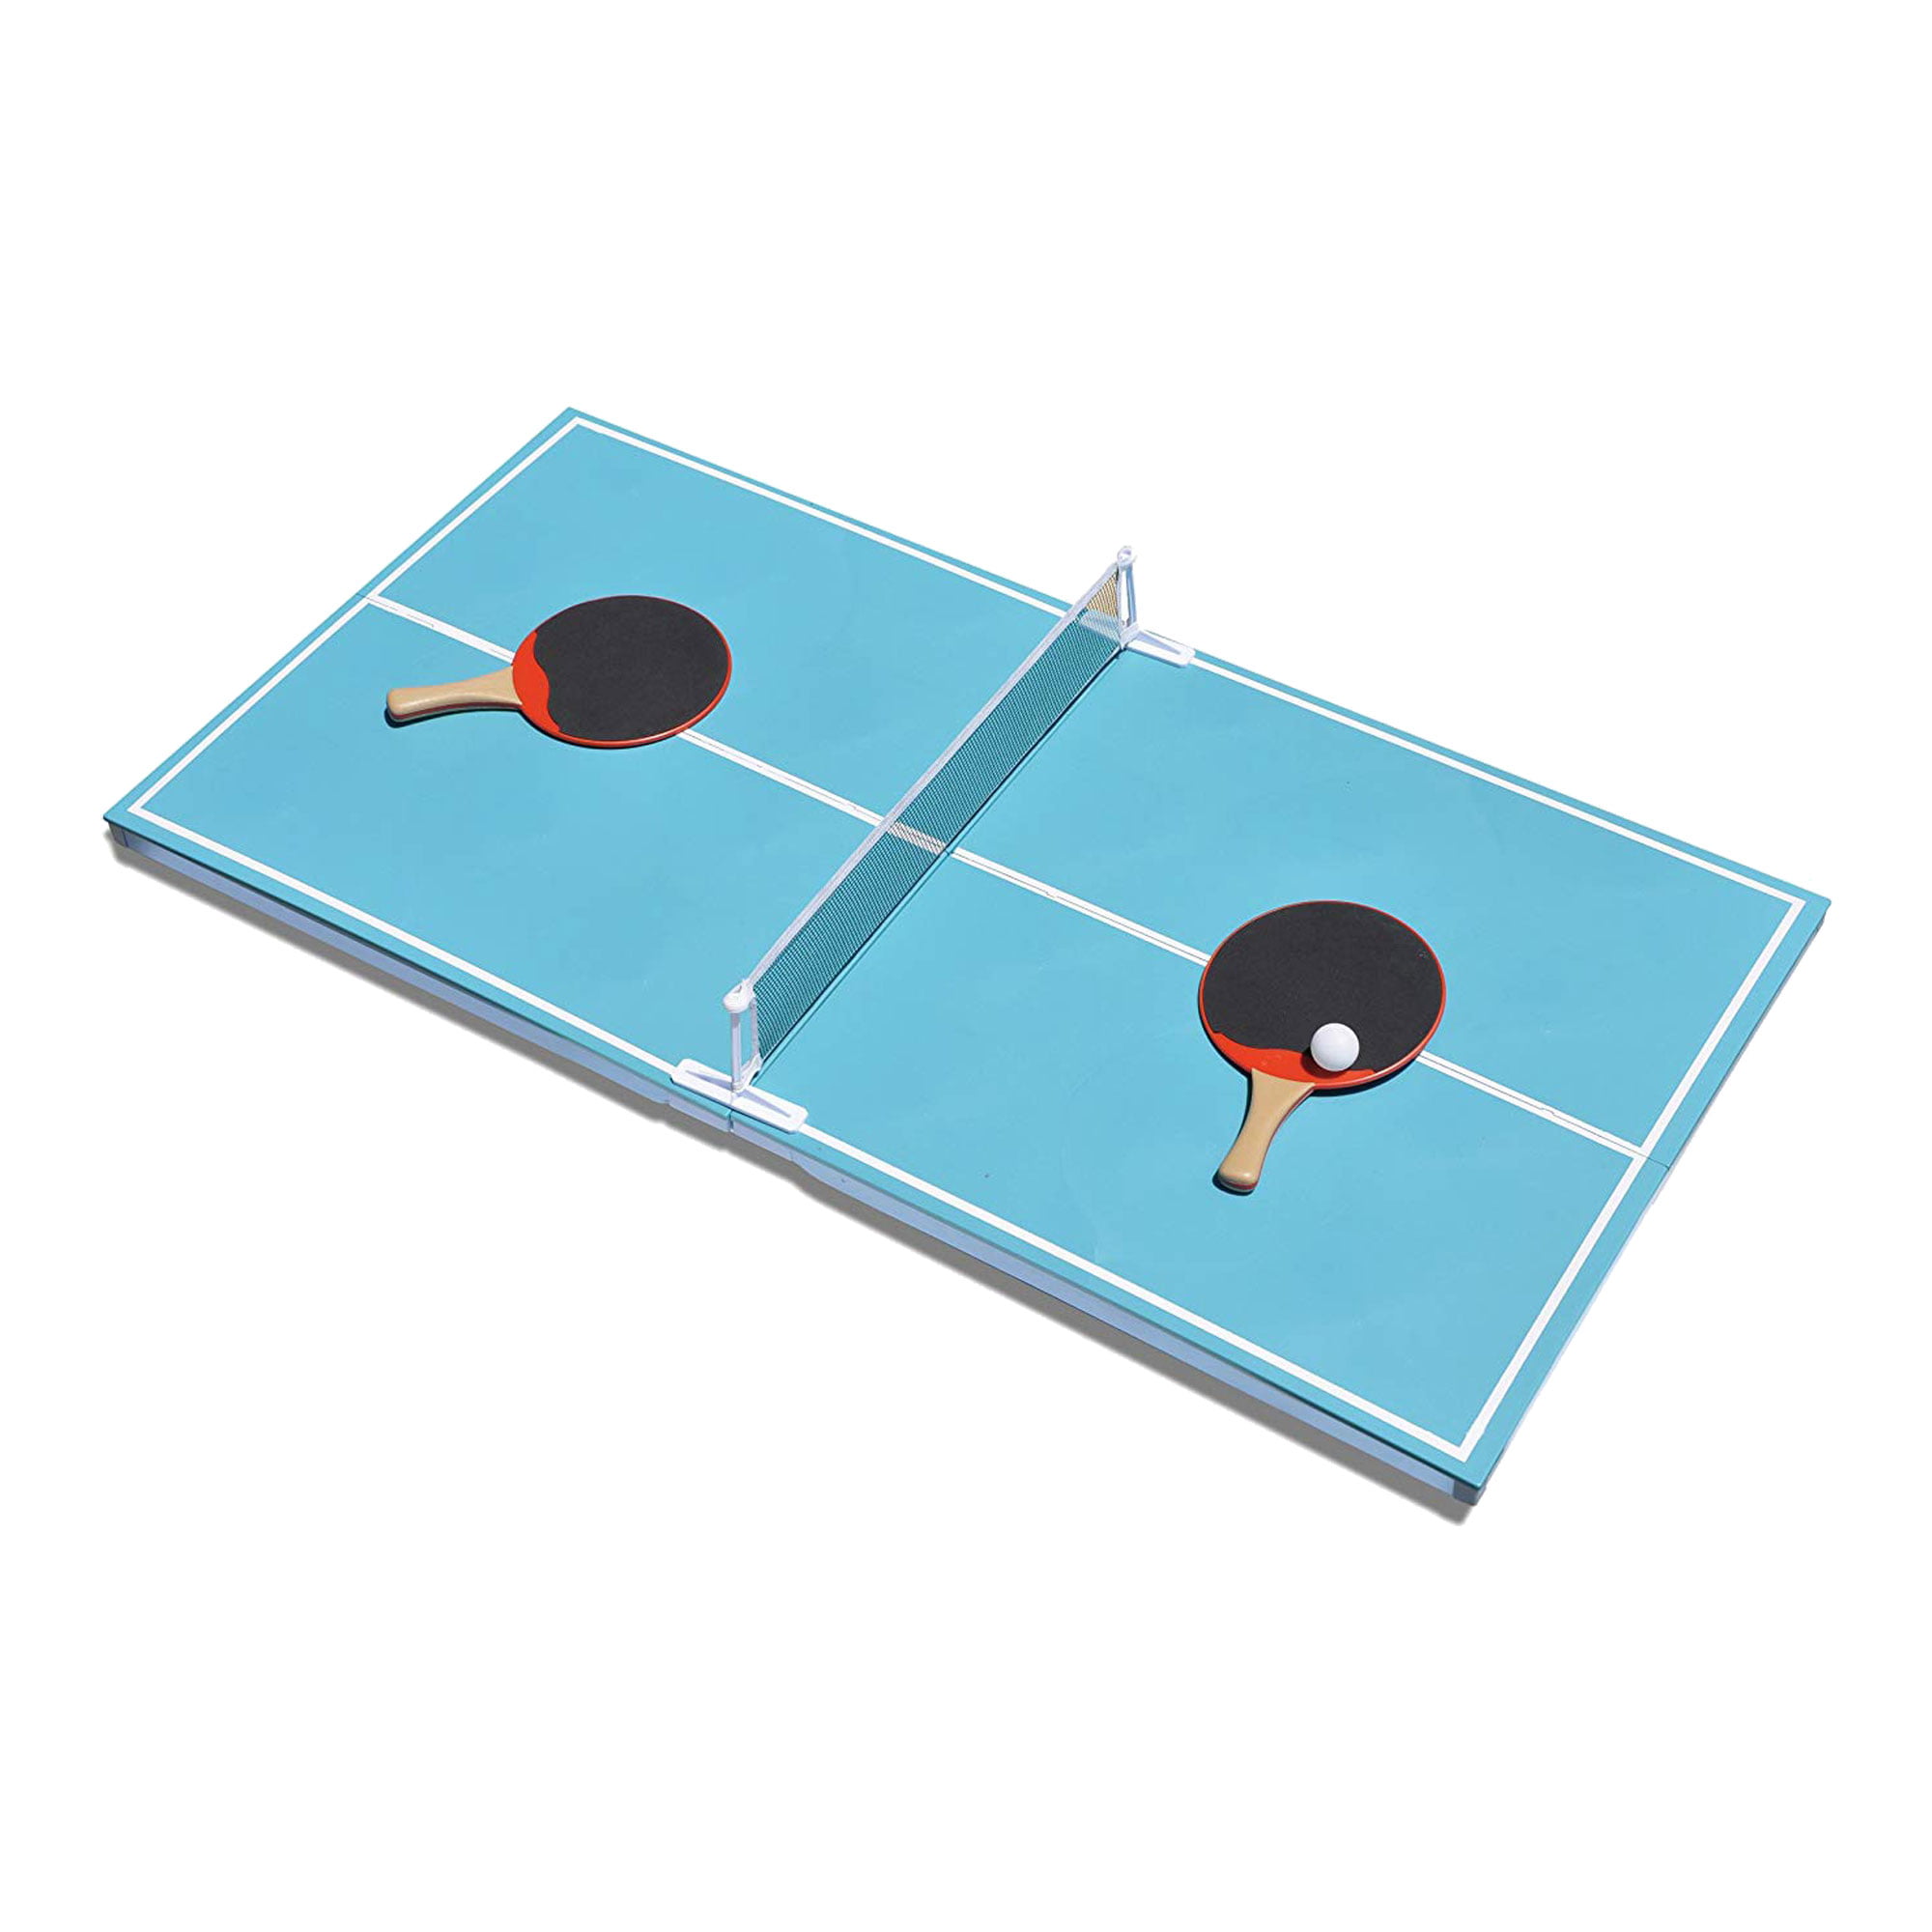 Floating Pool Ping Pong Table Tennis Party Durable Black Foam 4 Feet USA Made 